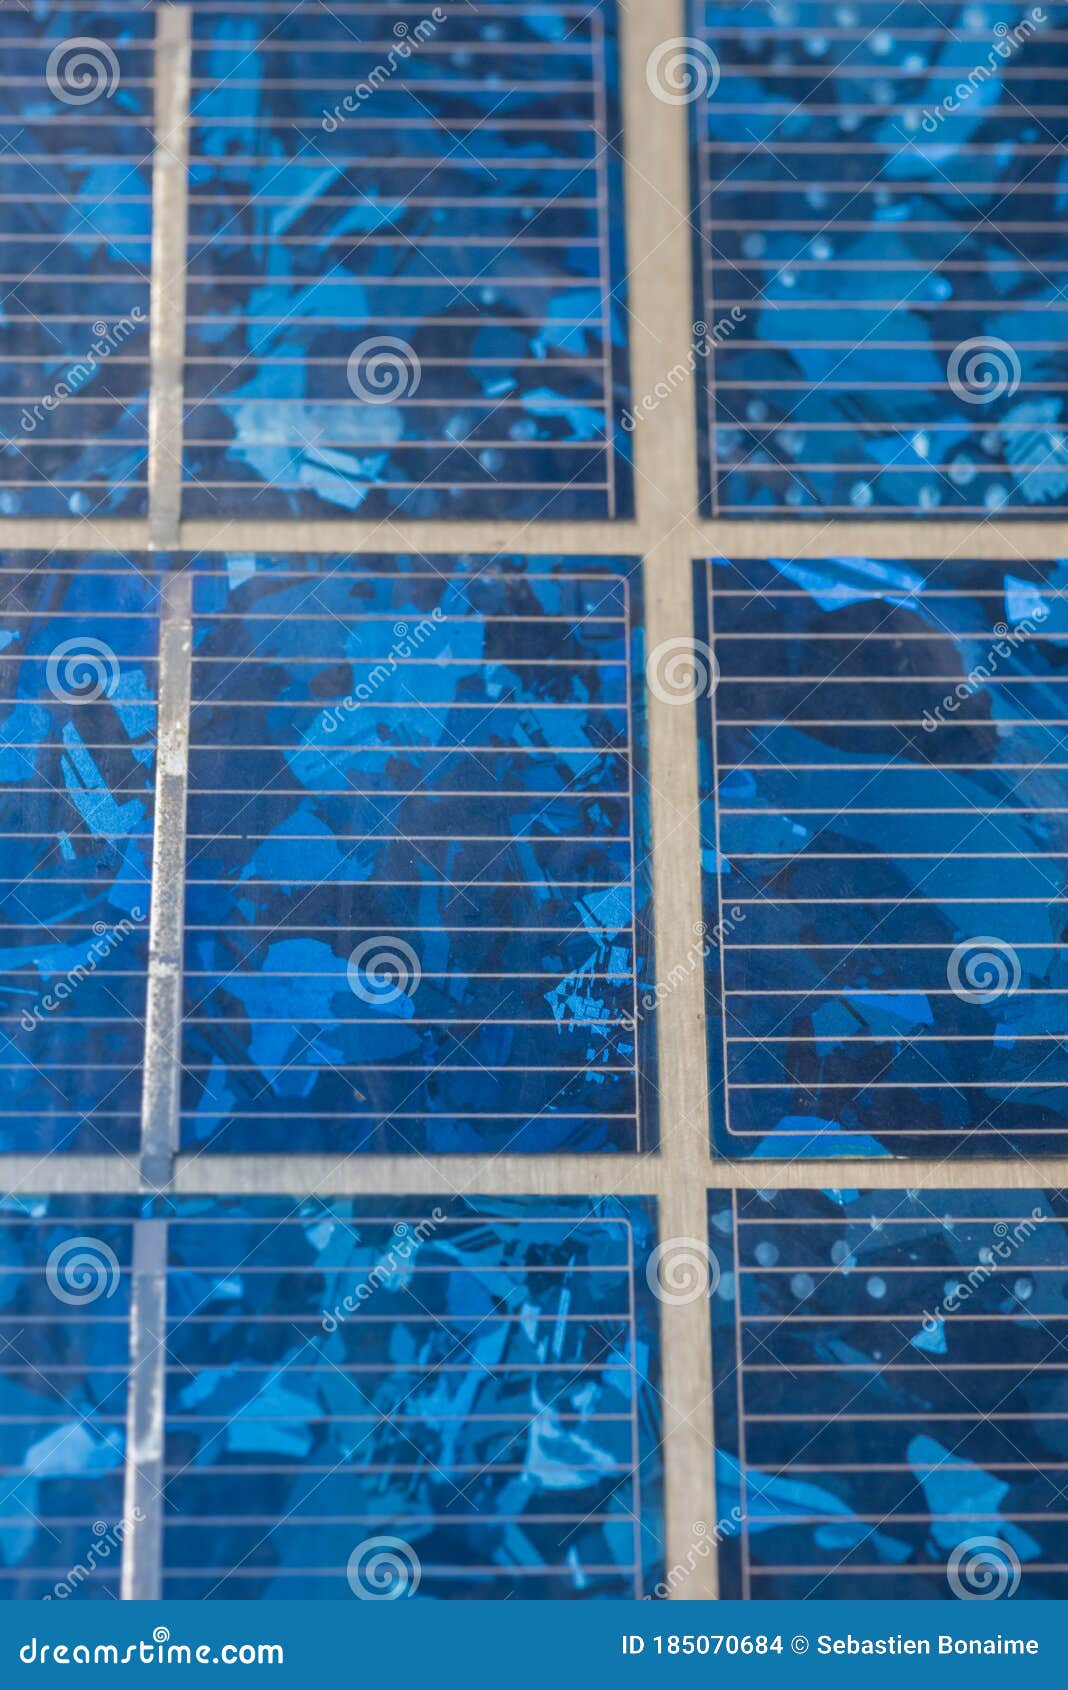 abstract image of solar panels details